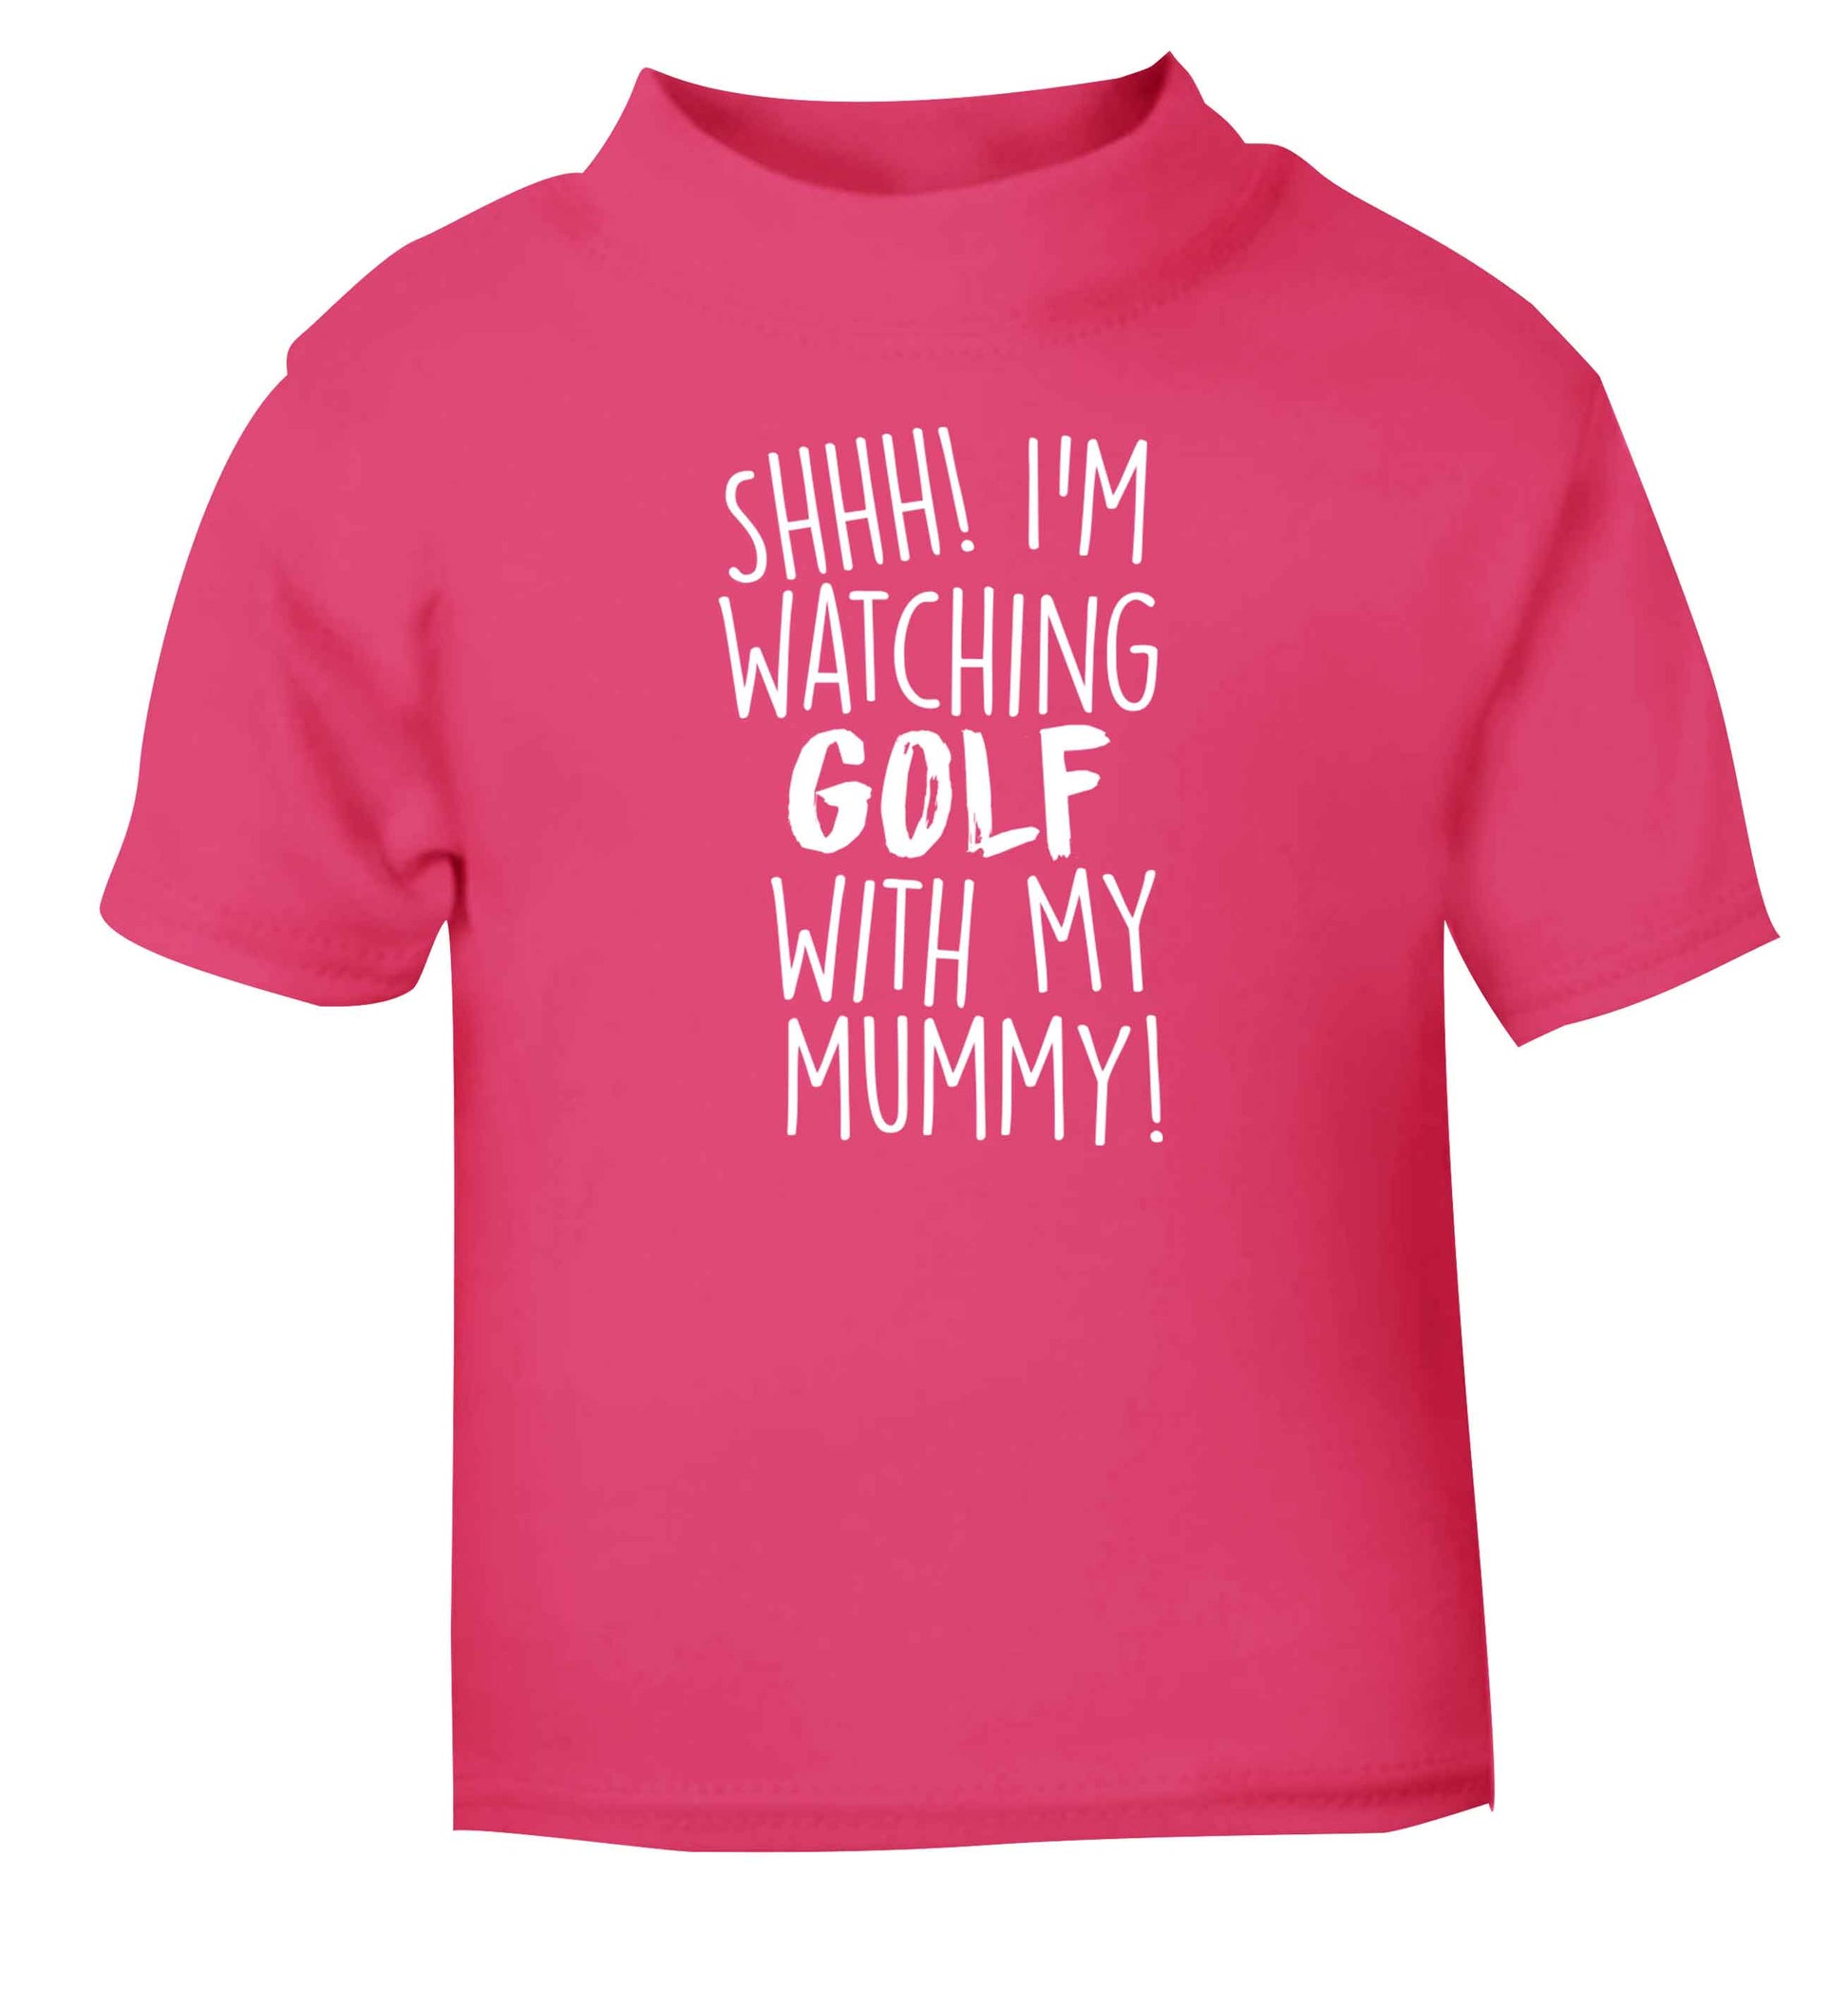 Shh I'm watching golf with my mummy pink Baby Toddler Tshirt 2 Years